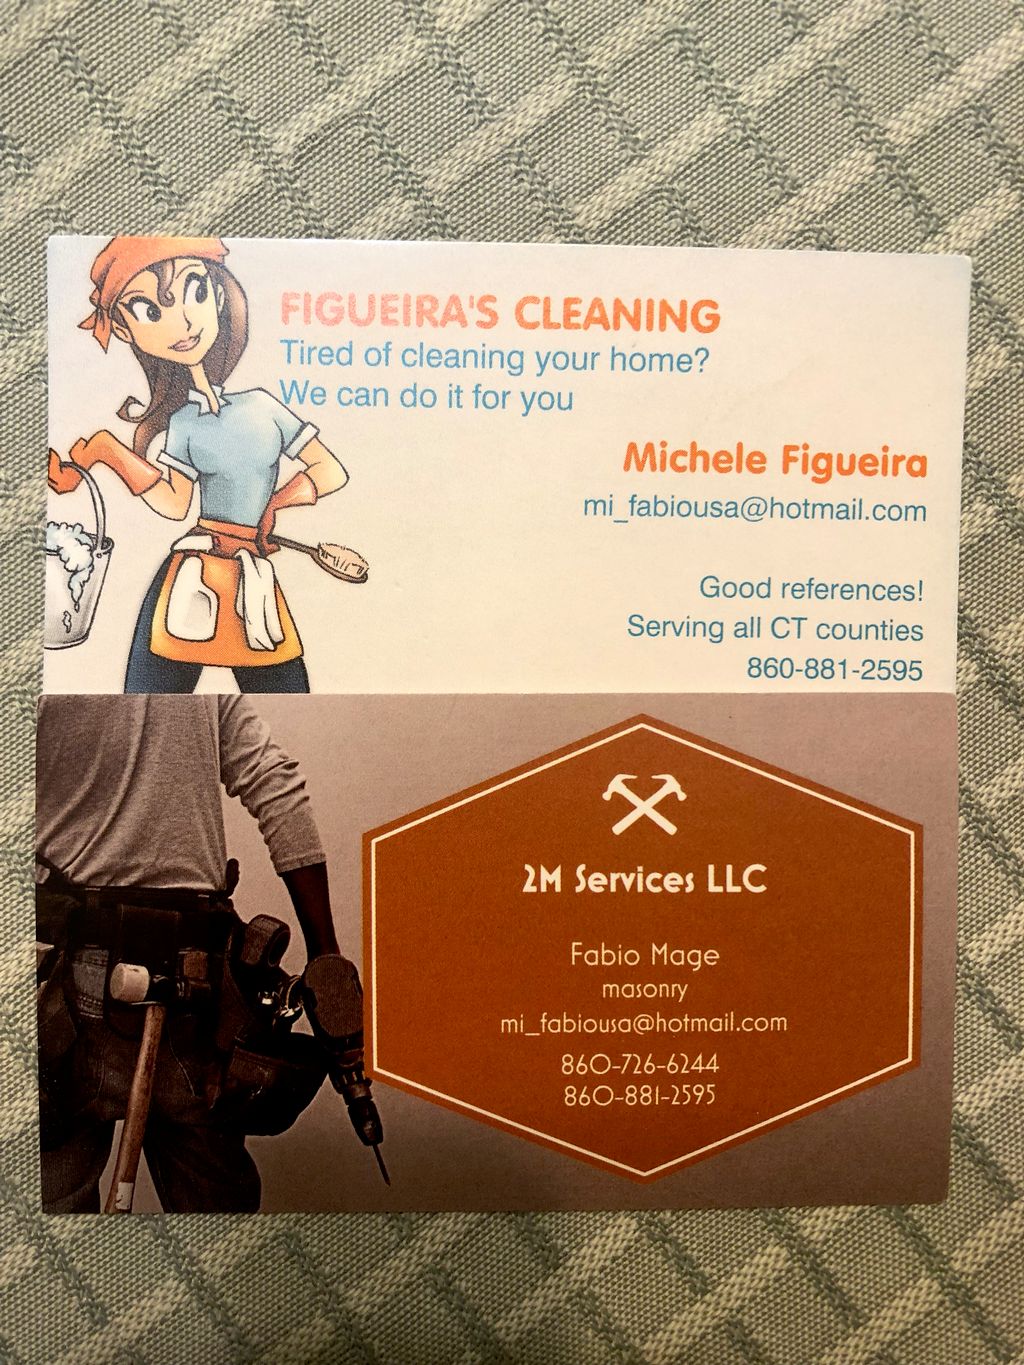 Figueira's Cleaning Services